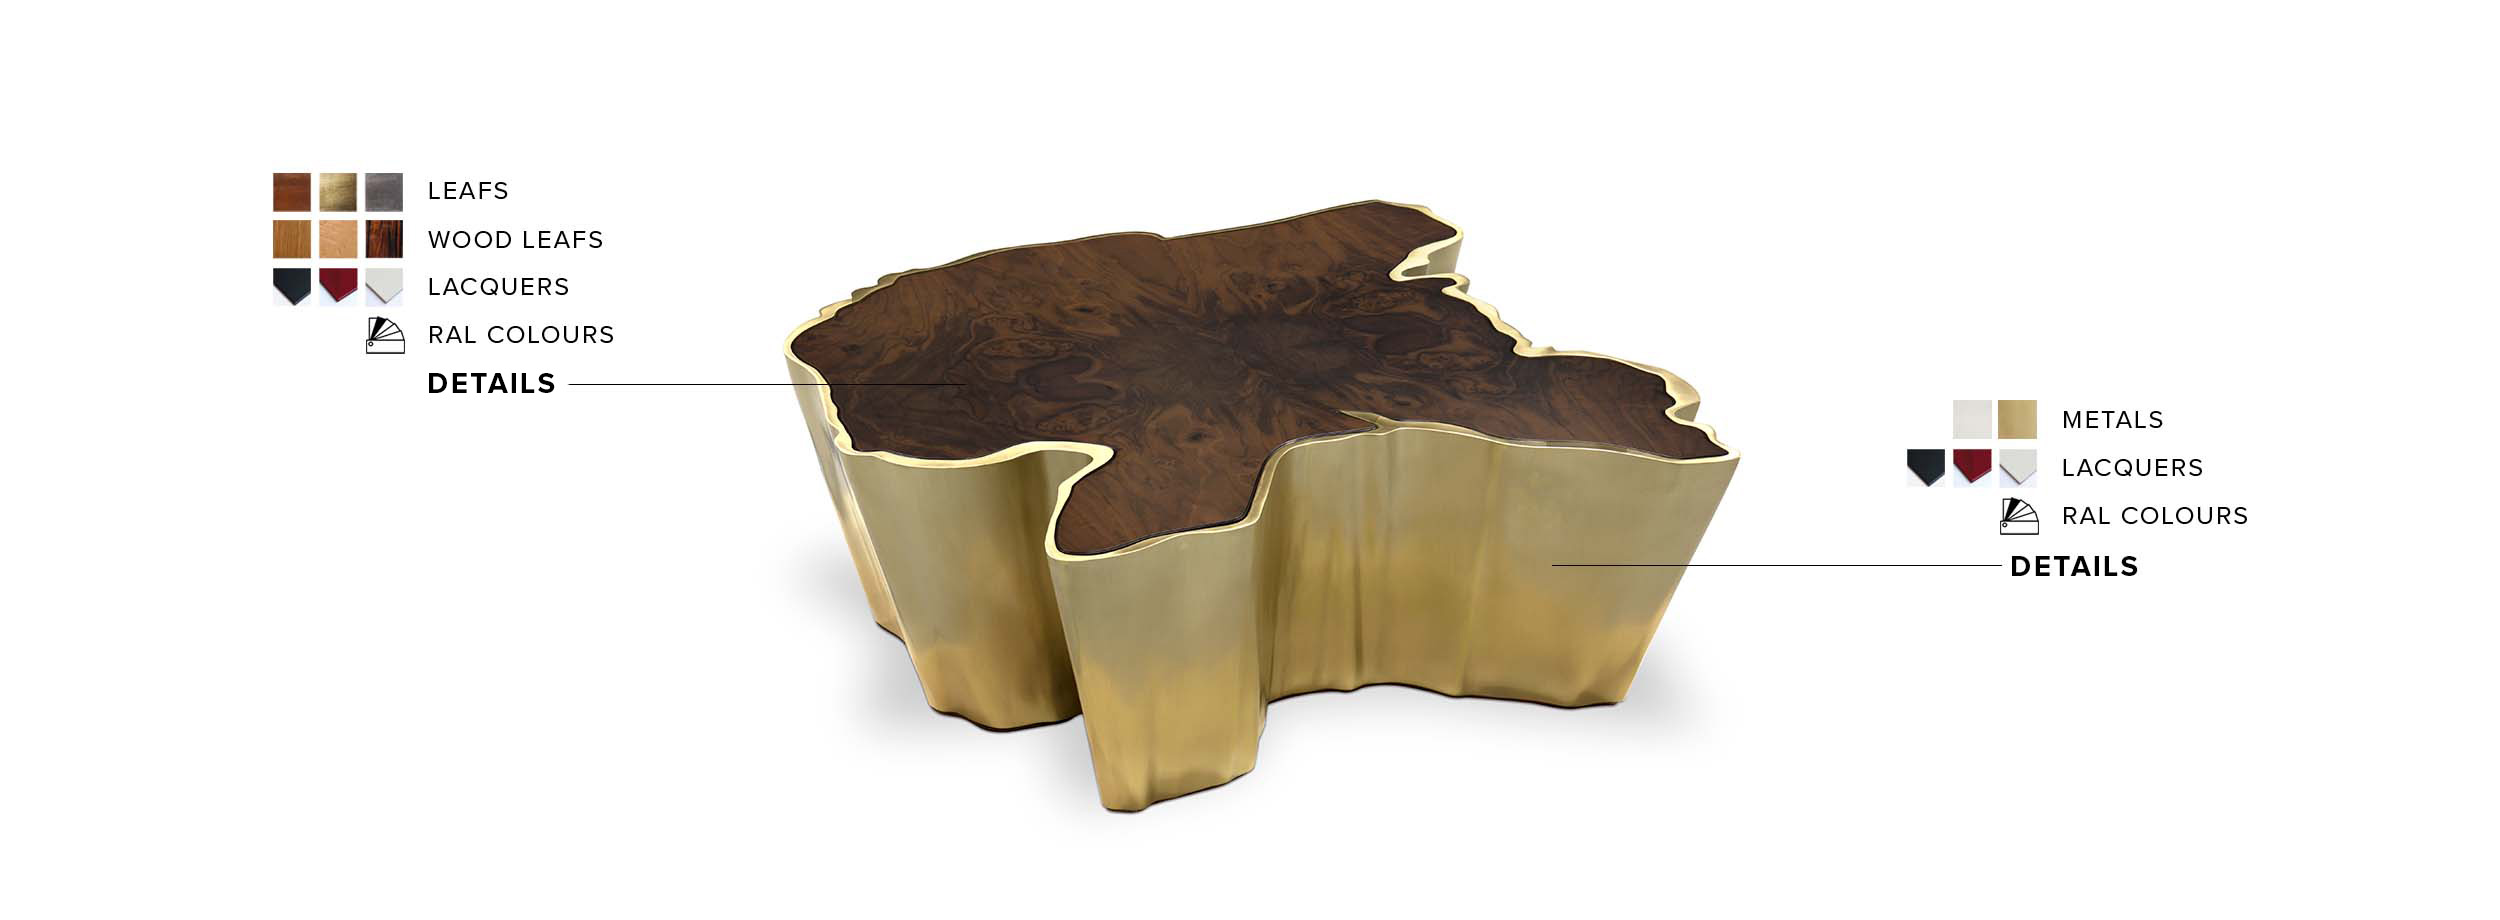 Sequoia Brass and Walnut Wood Coffee Table Design Modern Contemporary - Home'Society